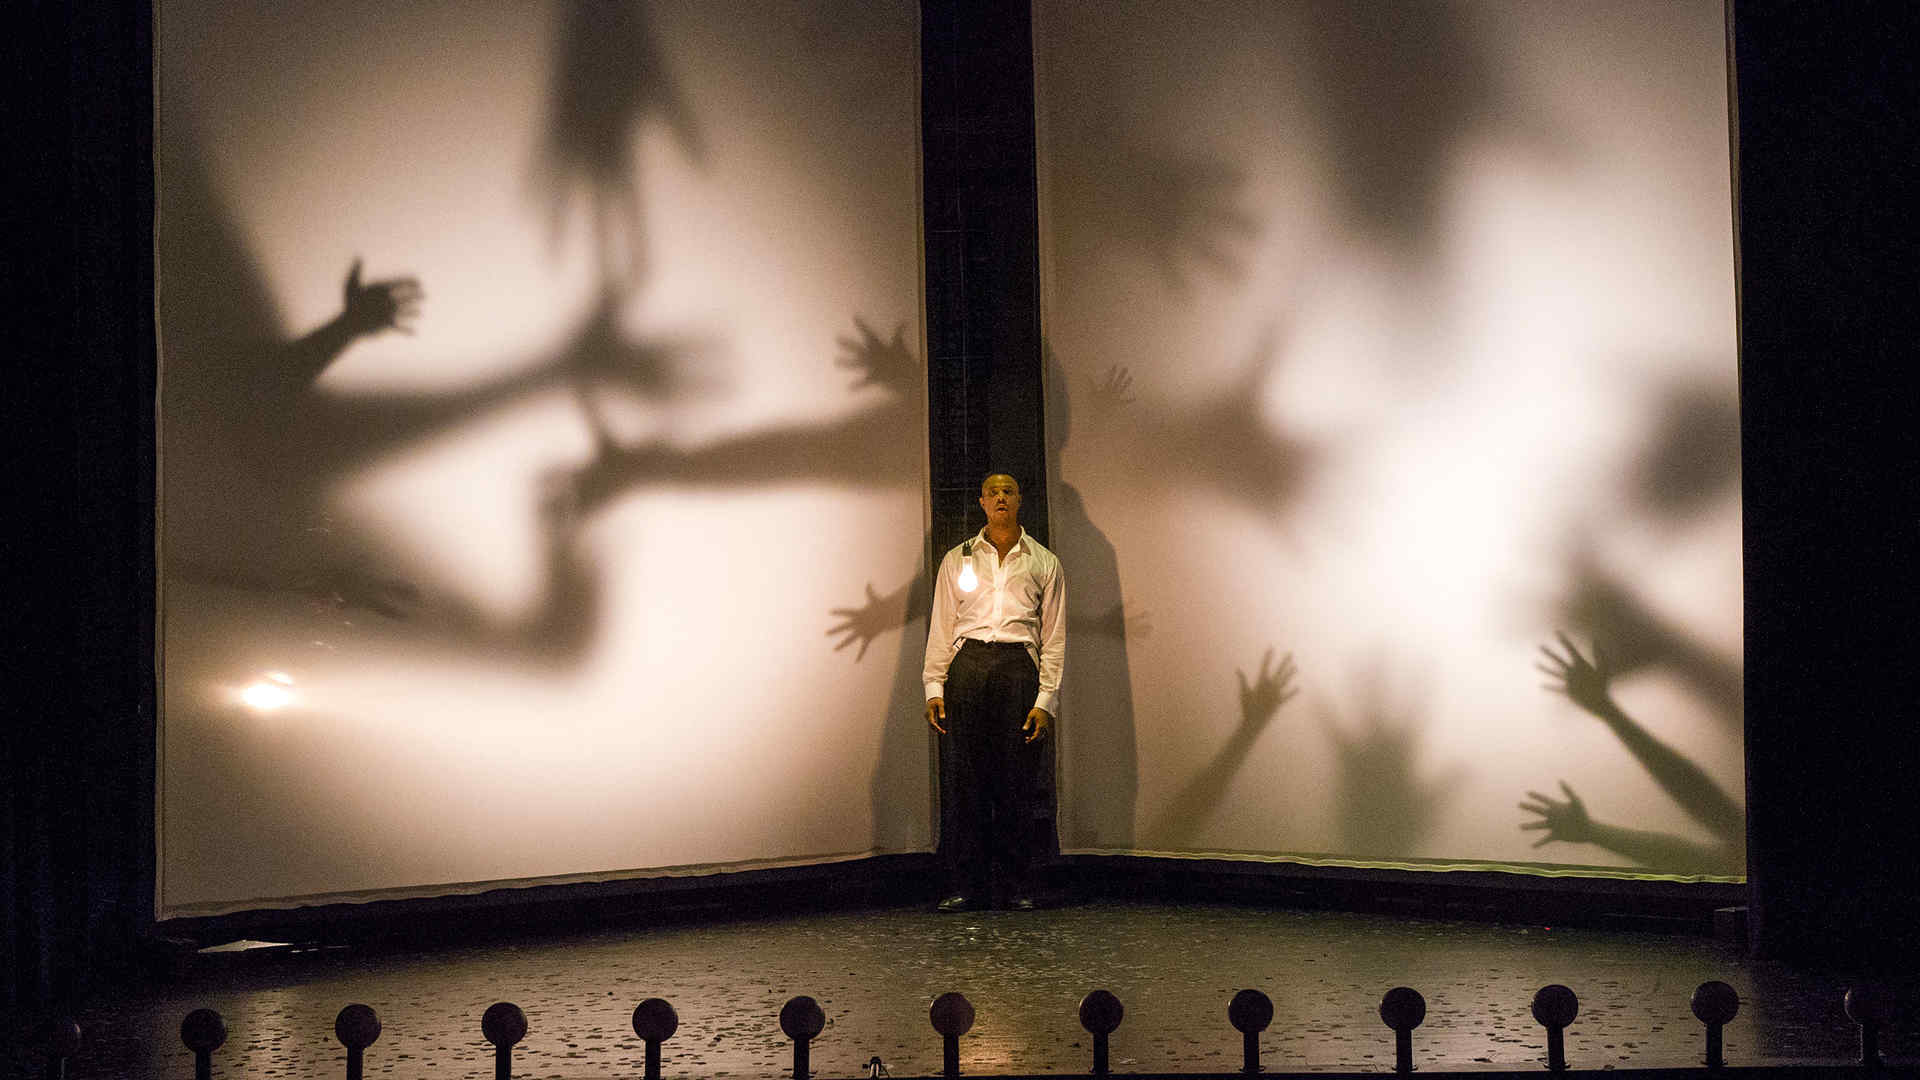 Man standing on stage with hand shadows in the background